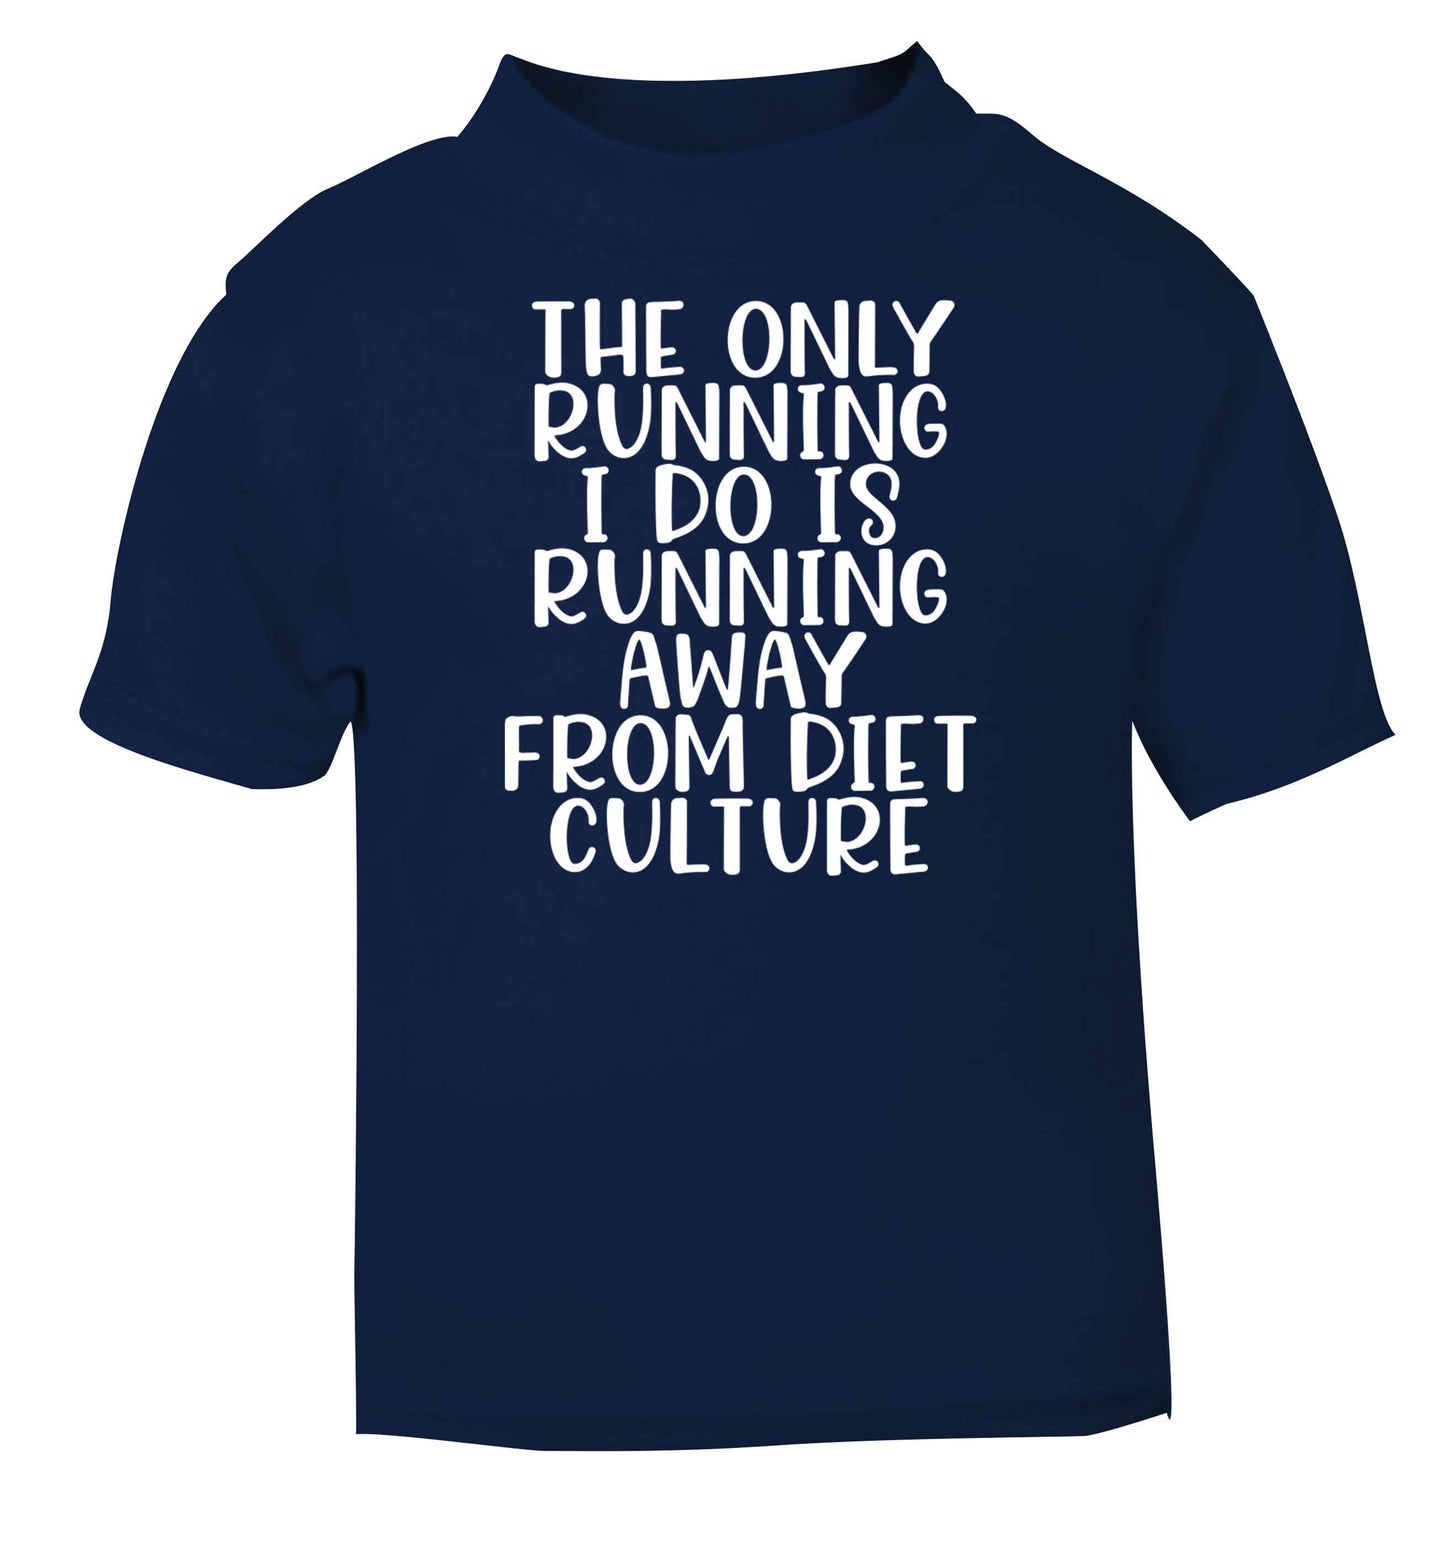 The only running I do is running away from diet culture navy baby toddler Tshirt 2 Years